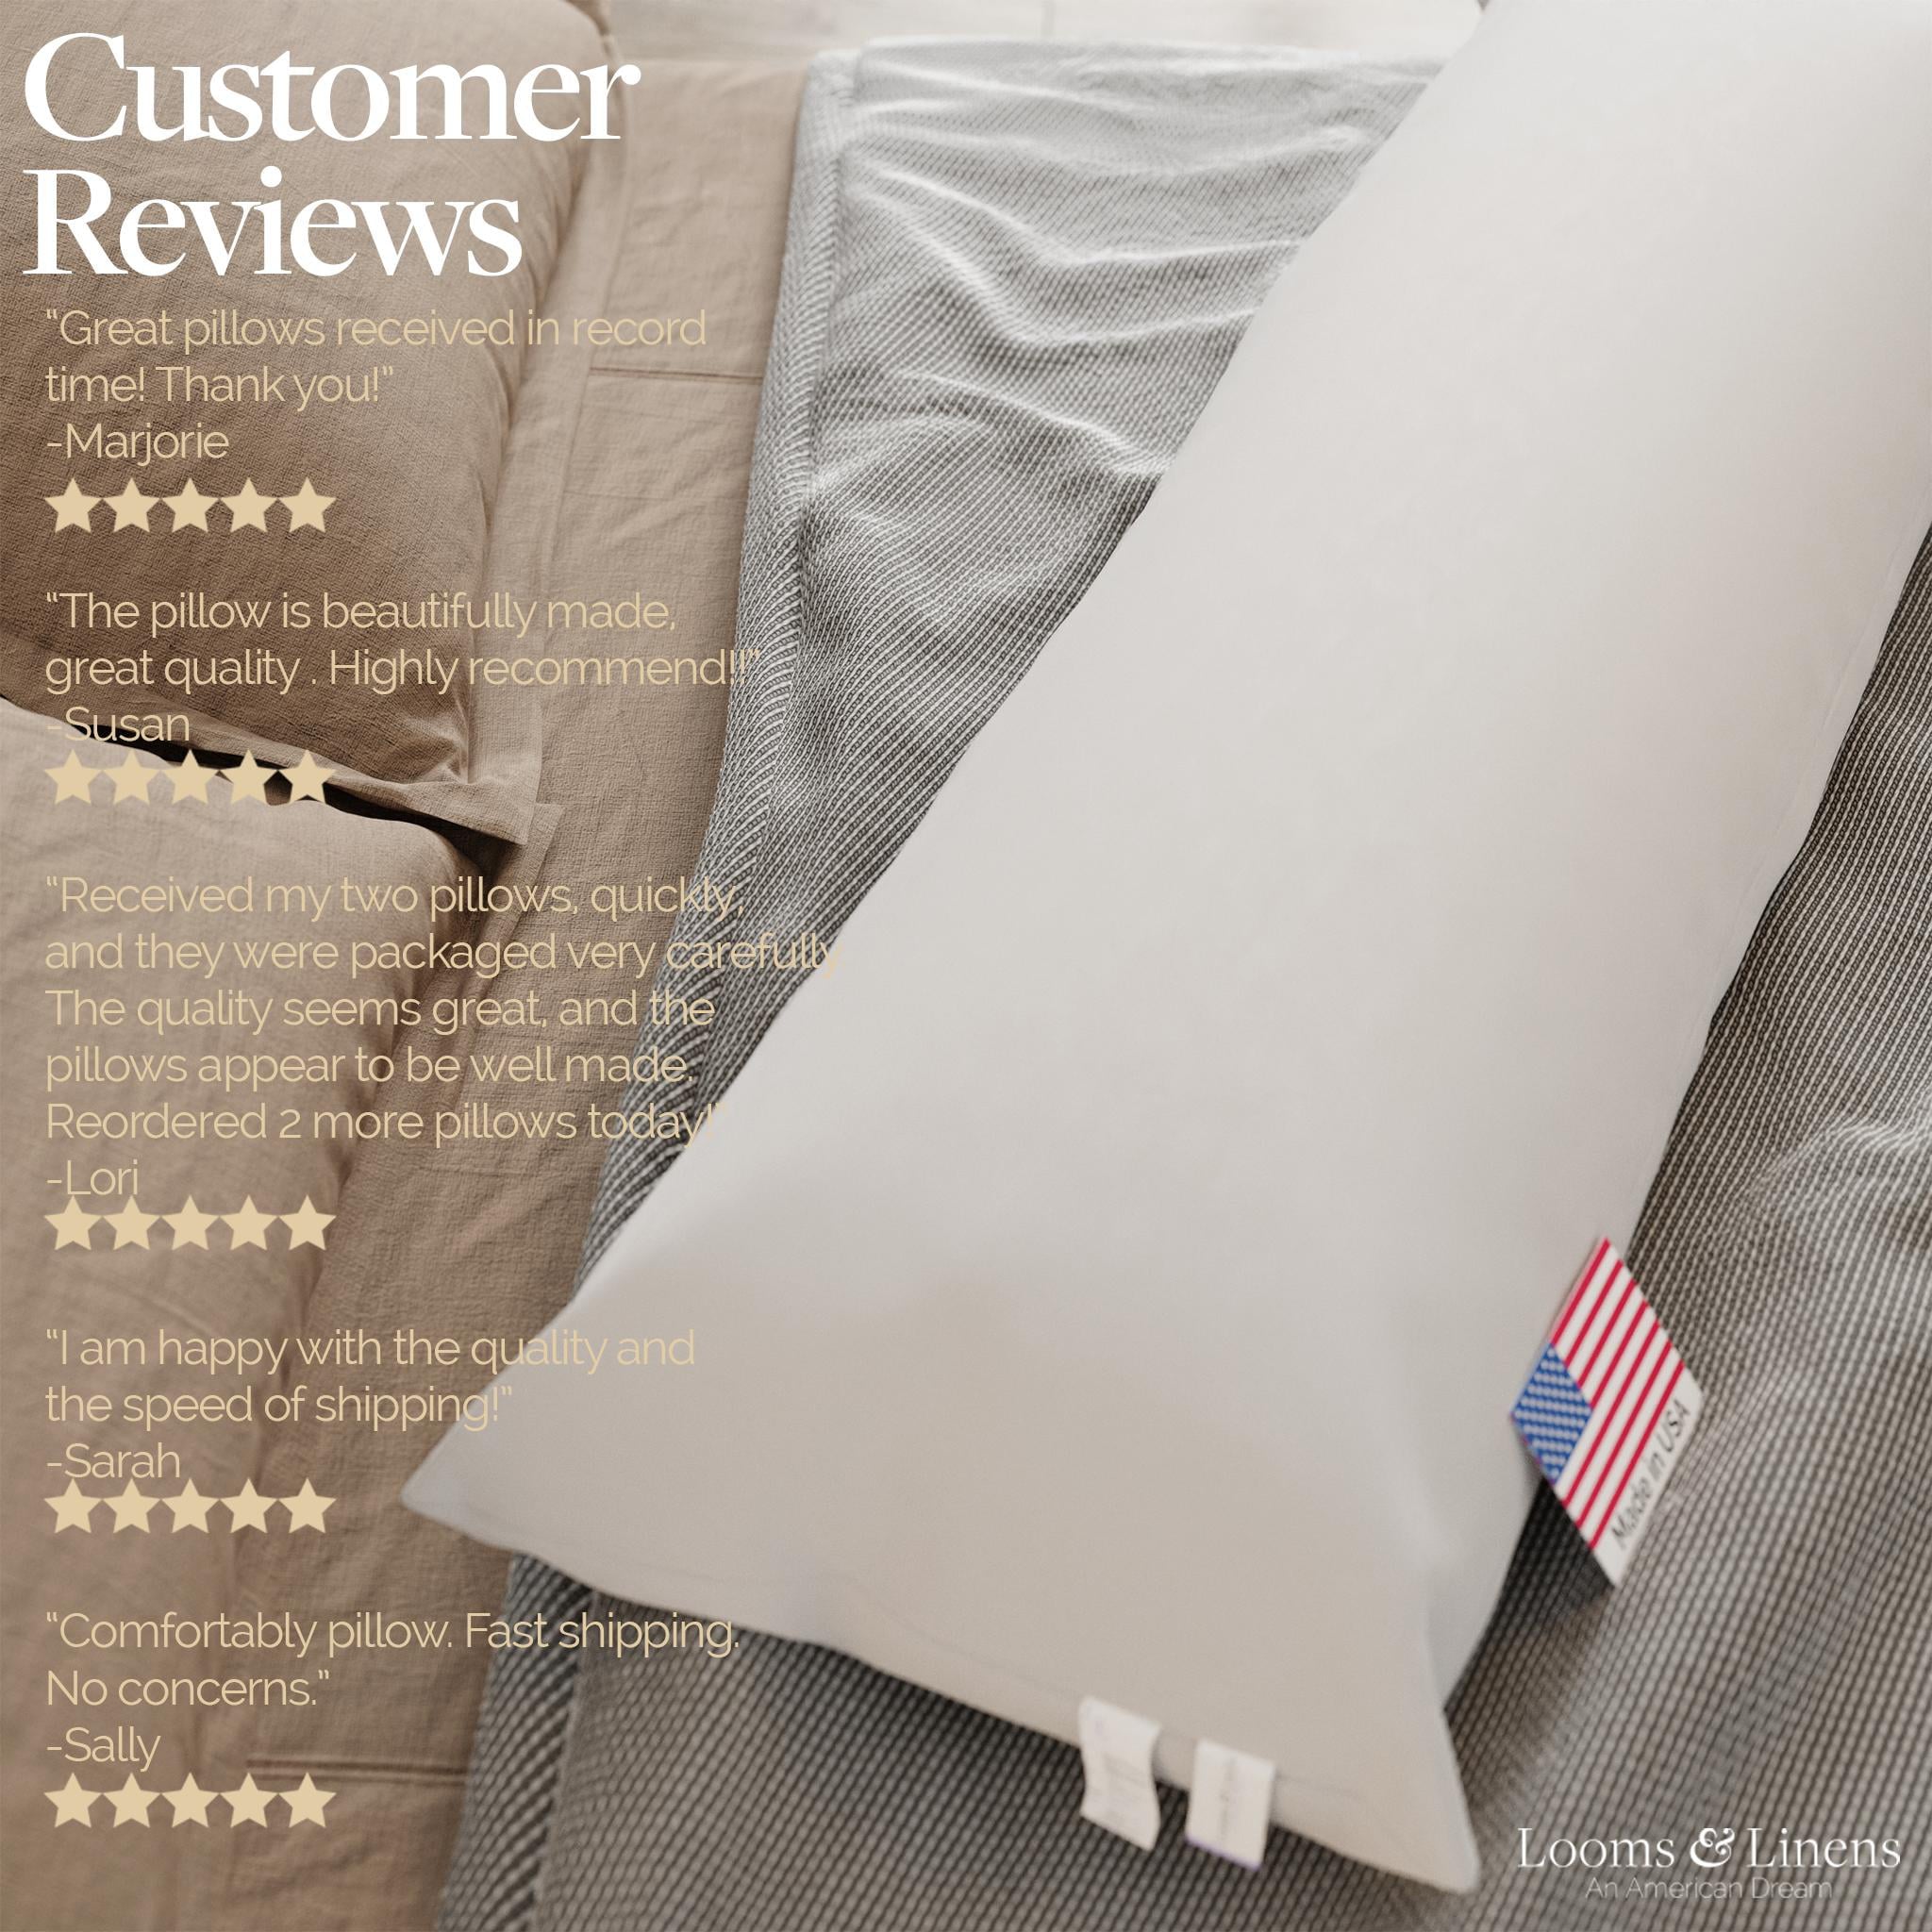 Looms & Linens Full Body Pillow Dakimakura Adults Elderly and Pregnant Woman Down Alternative Plush Filling - Long Pillow Posture and Spine Support for Rem Sleep Pillow Large 20 x 60 inch 1 Pack